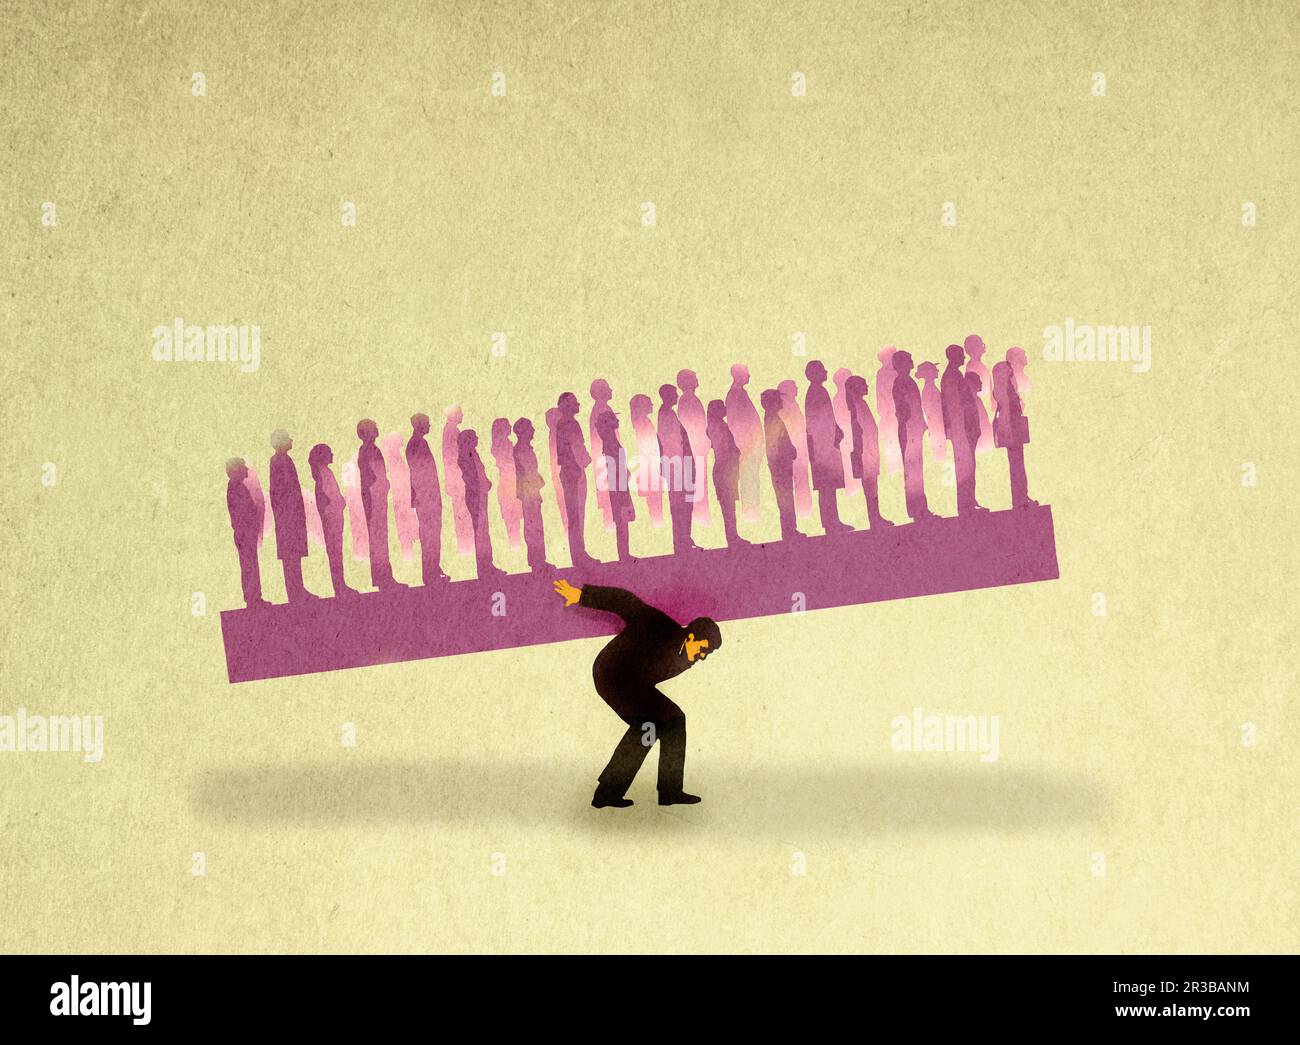 Illustration of man carrying group of people Stock Photo